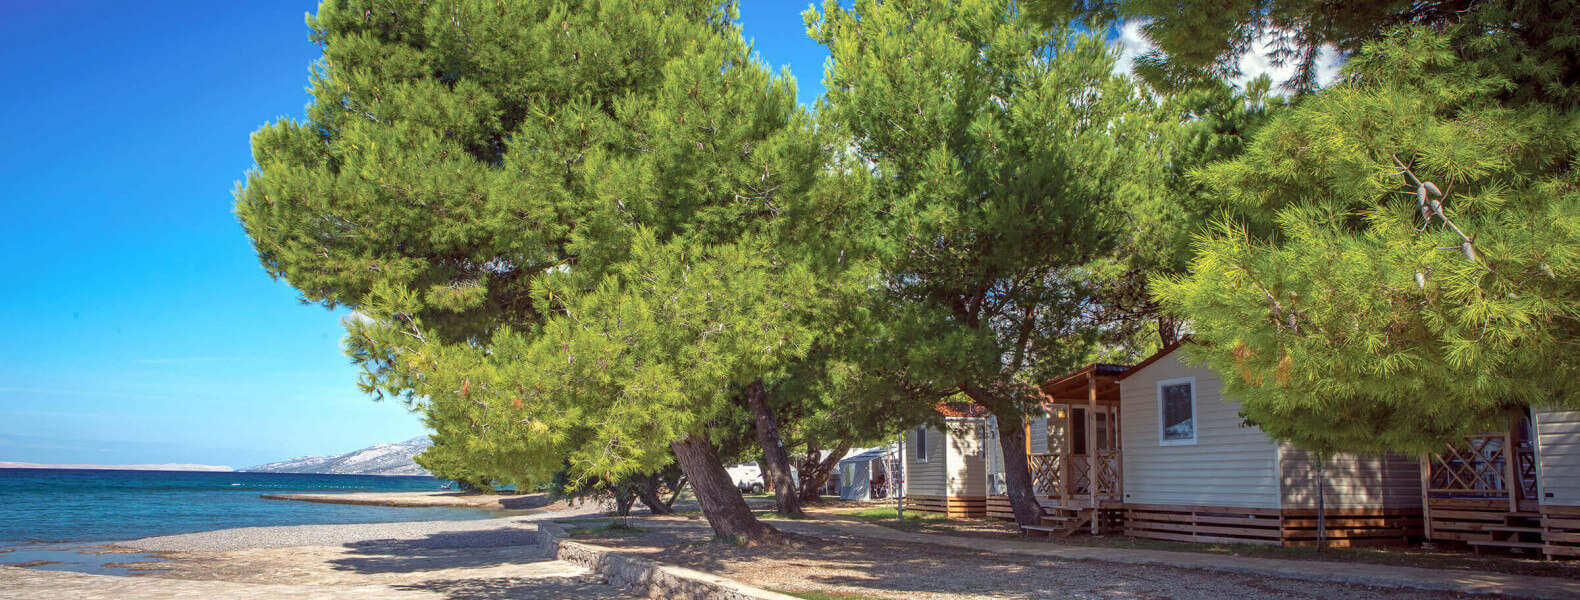 Camping Paklenica - mobile homes